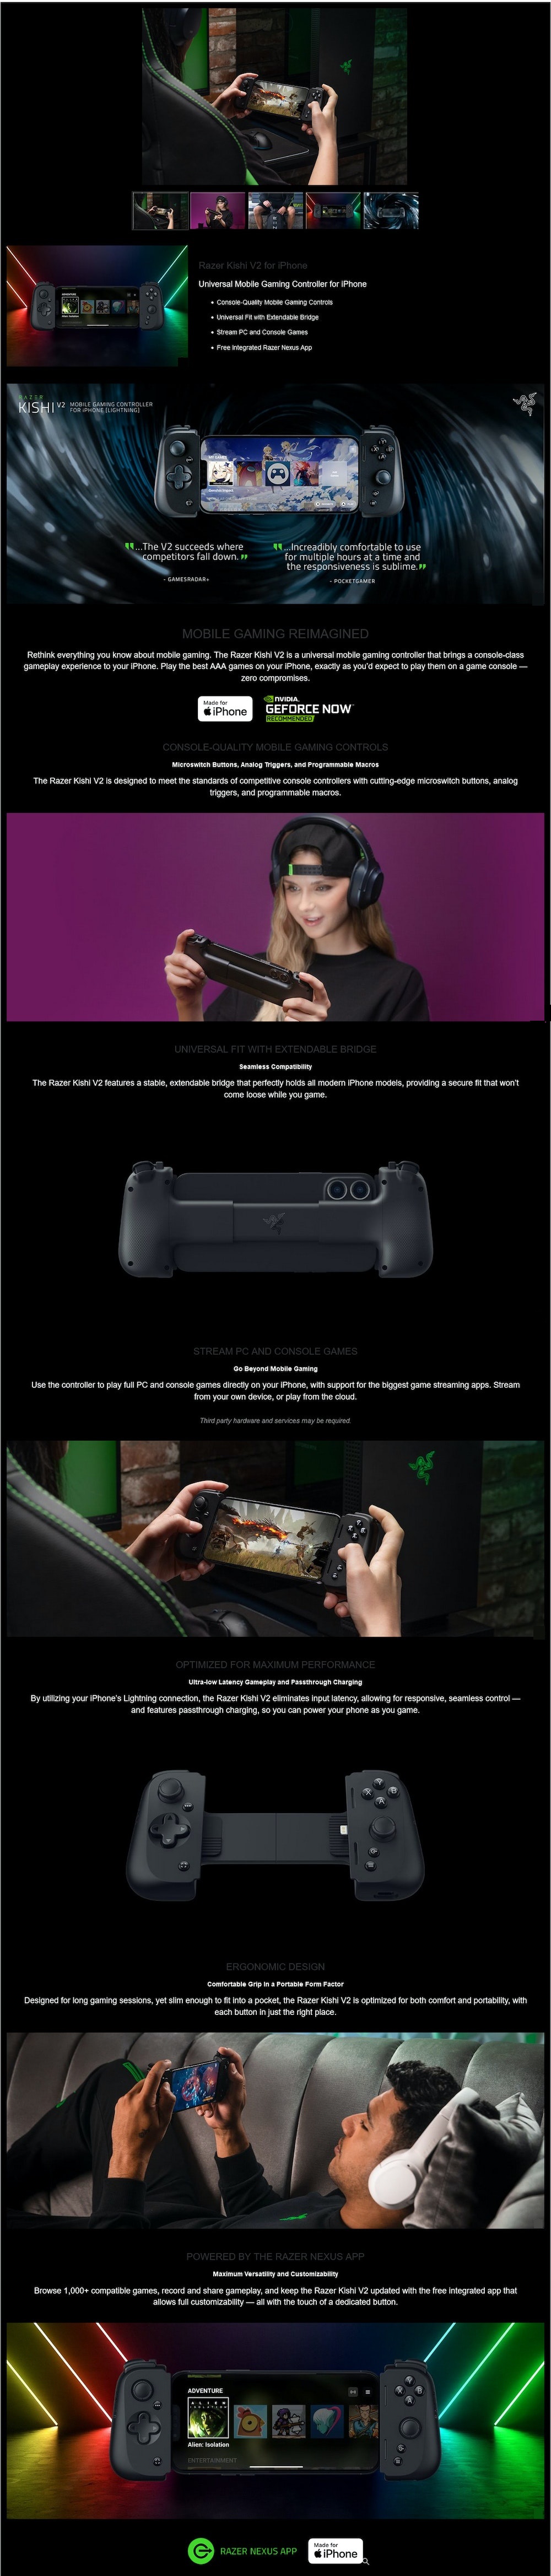 A large marketing image providing additional information about the product Razer Kishi V2 - Gaming Controller for iPhone - Additional alt info not provided